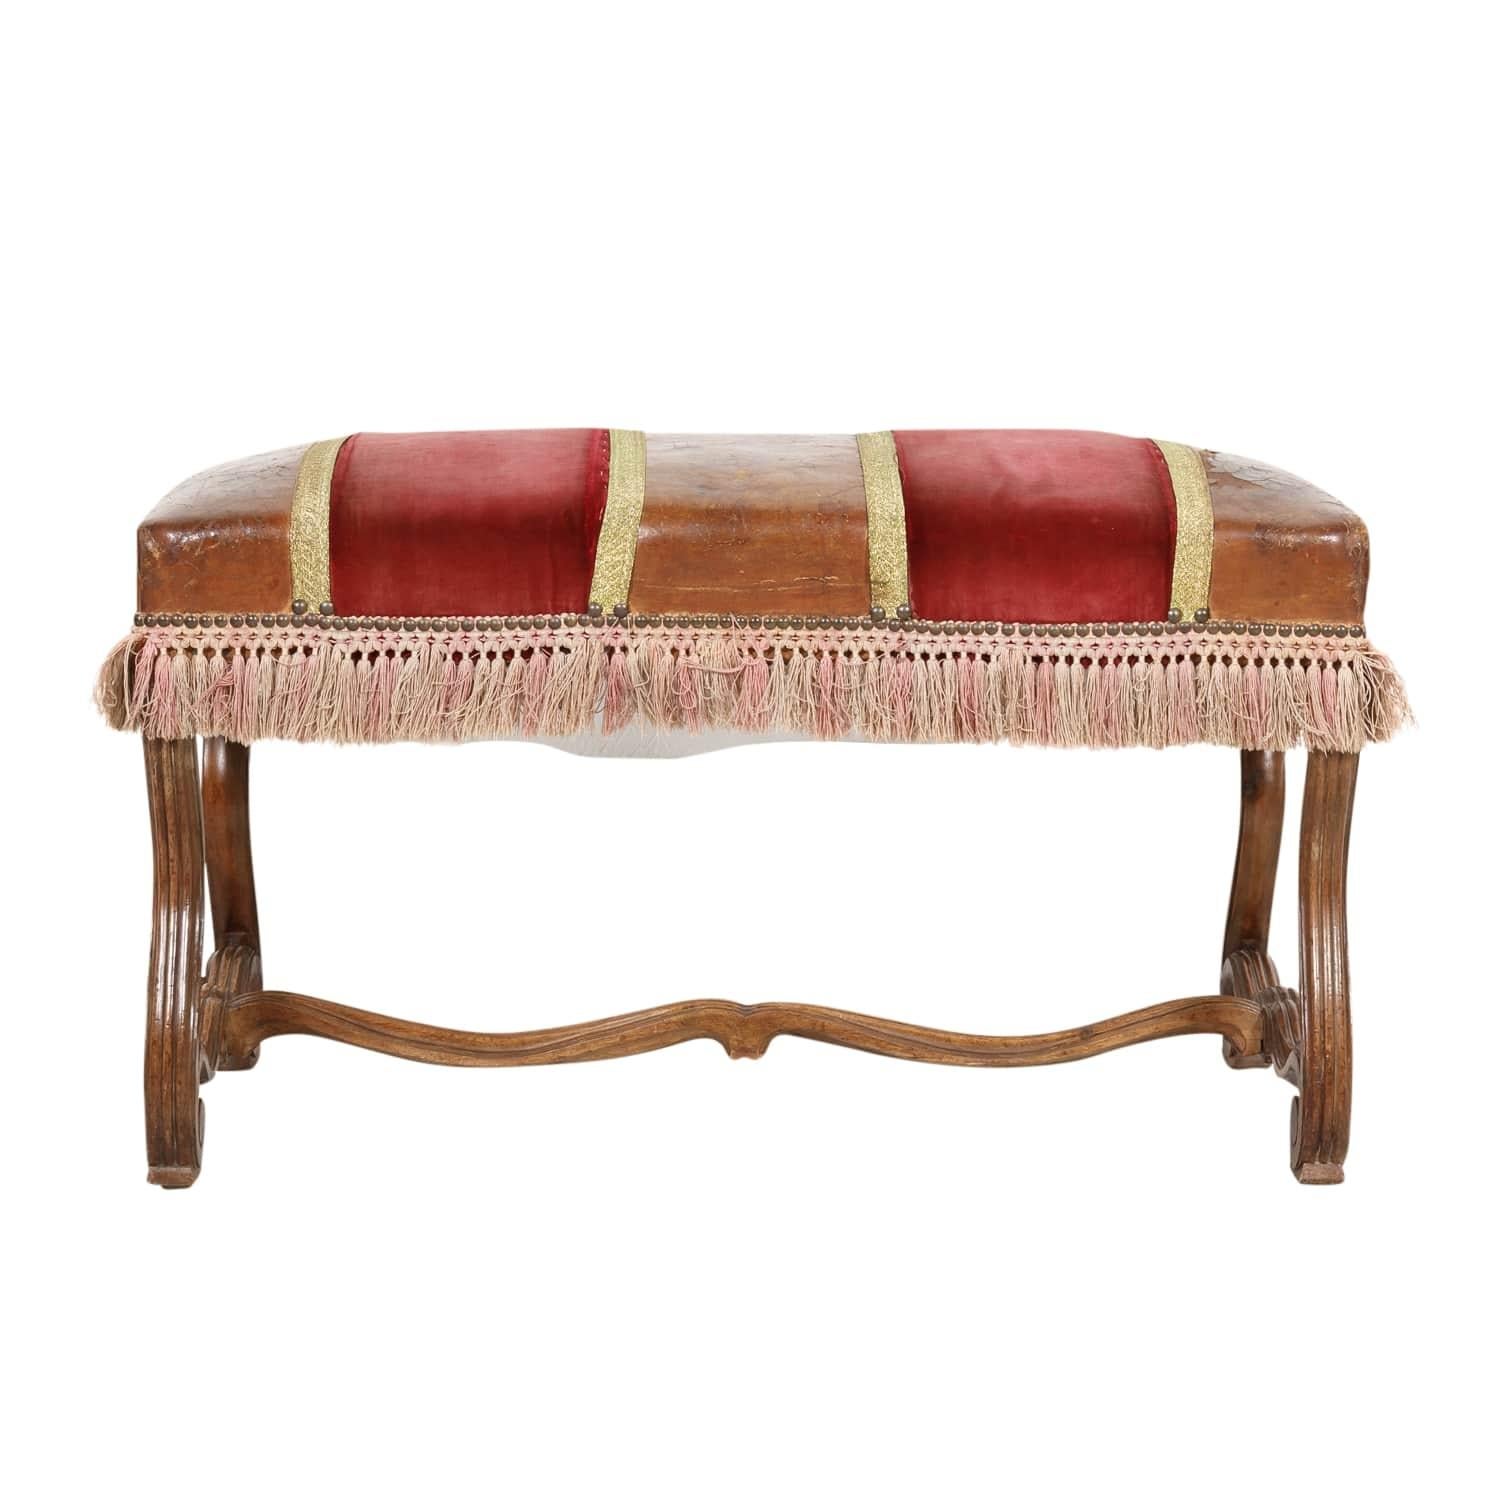 19th Century Spanish Backless Leather and Velvet Louis XIV Style Bench For Sale 9